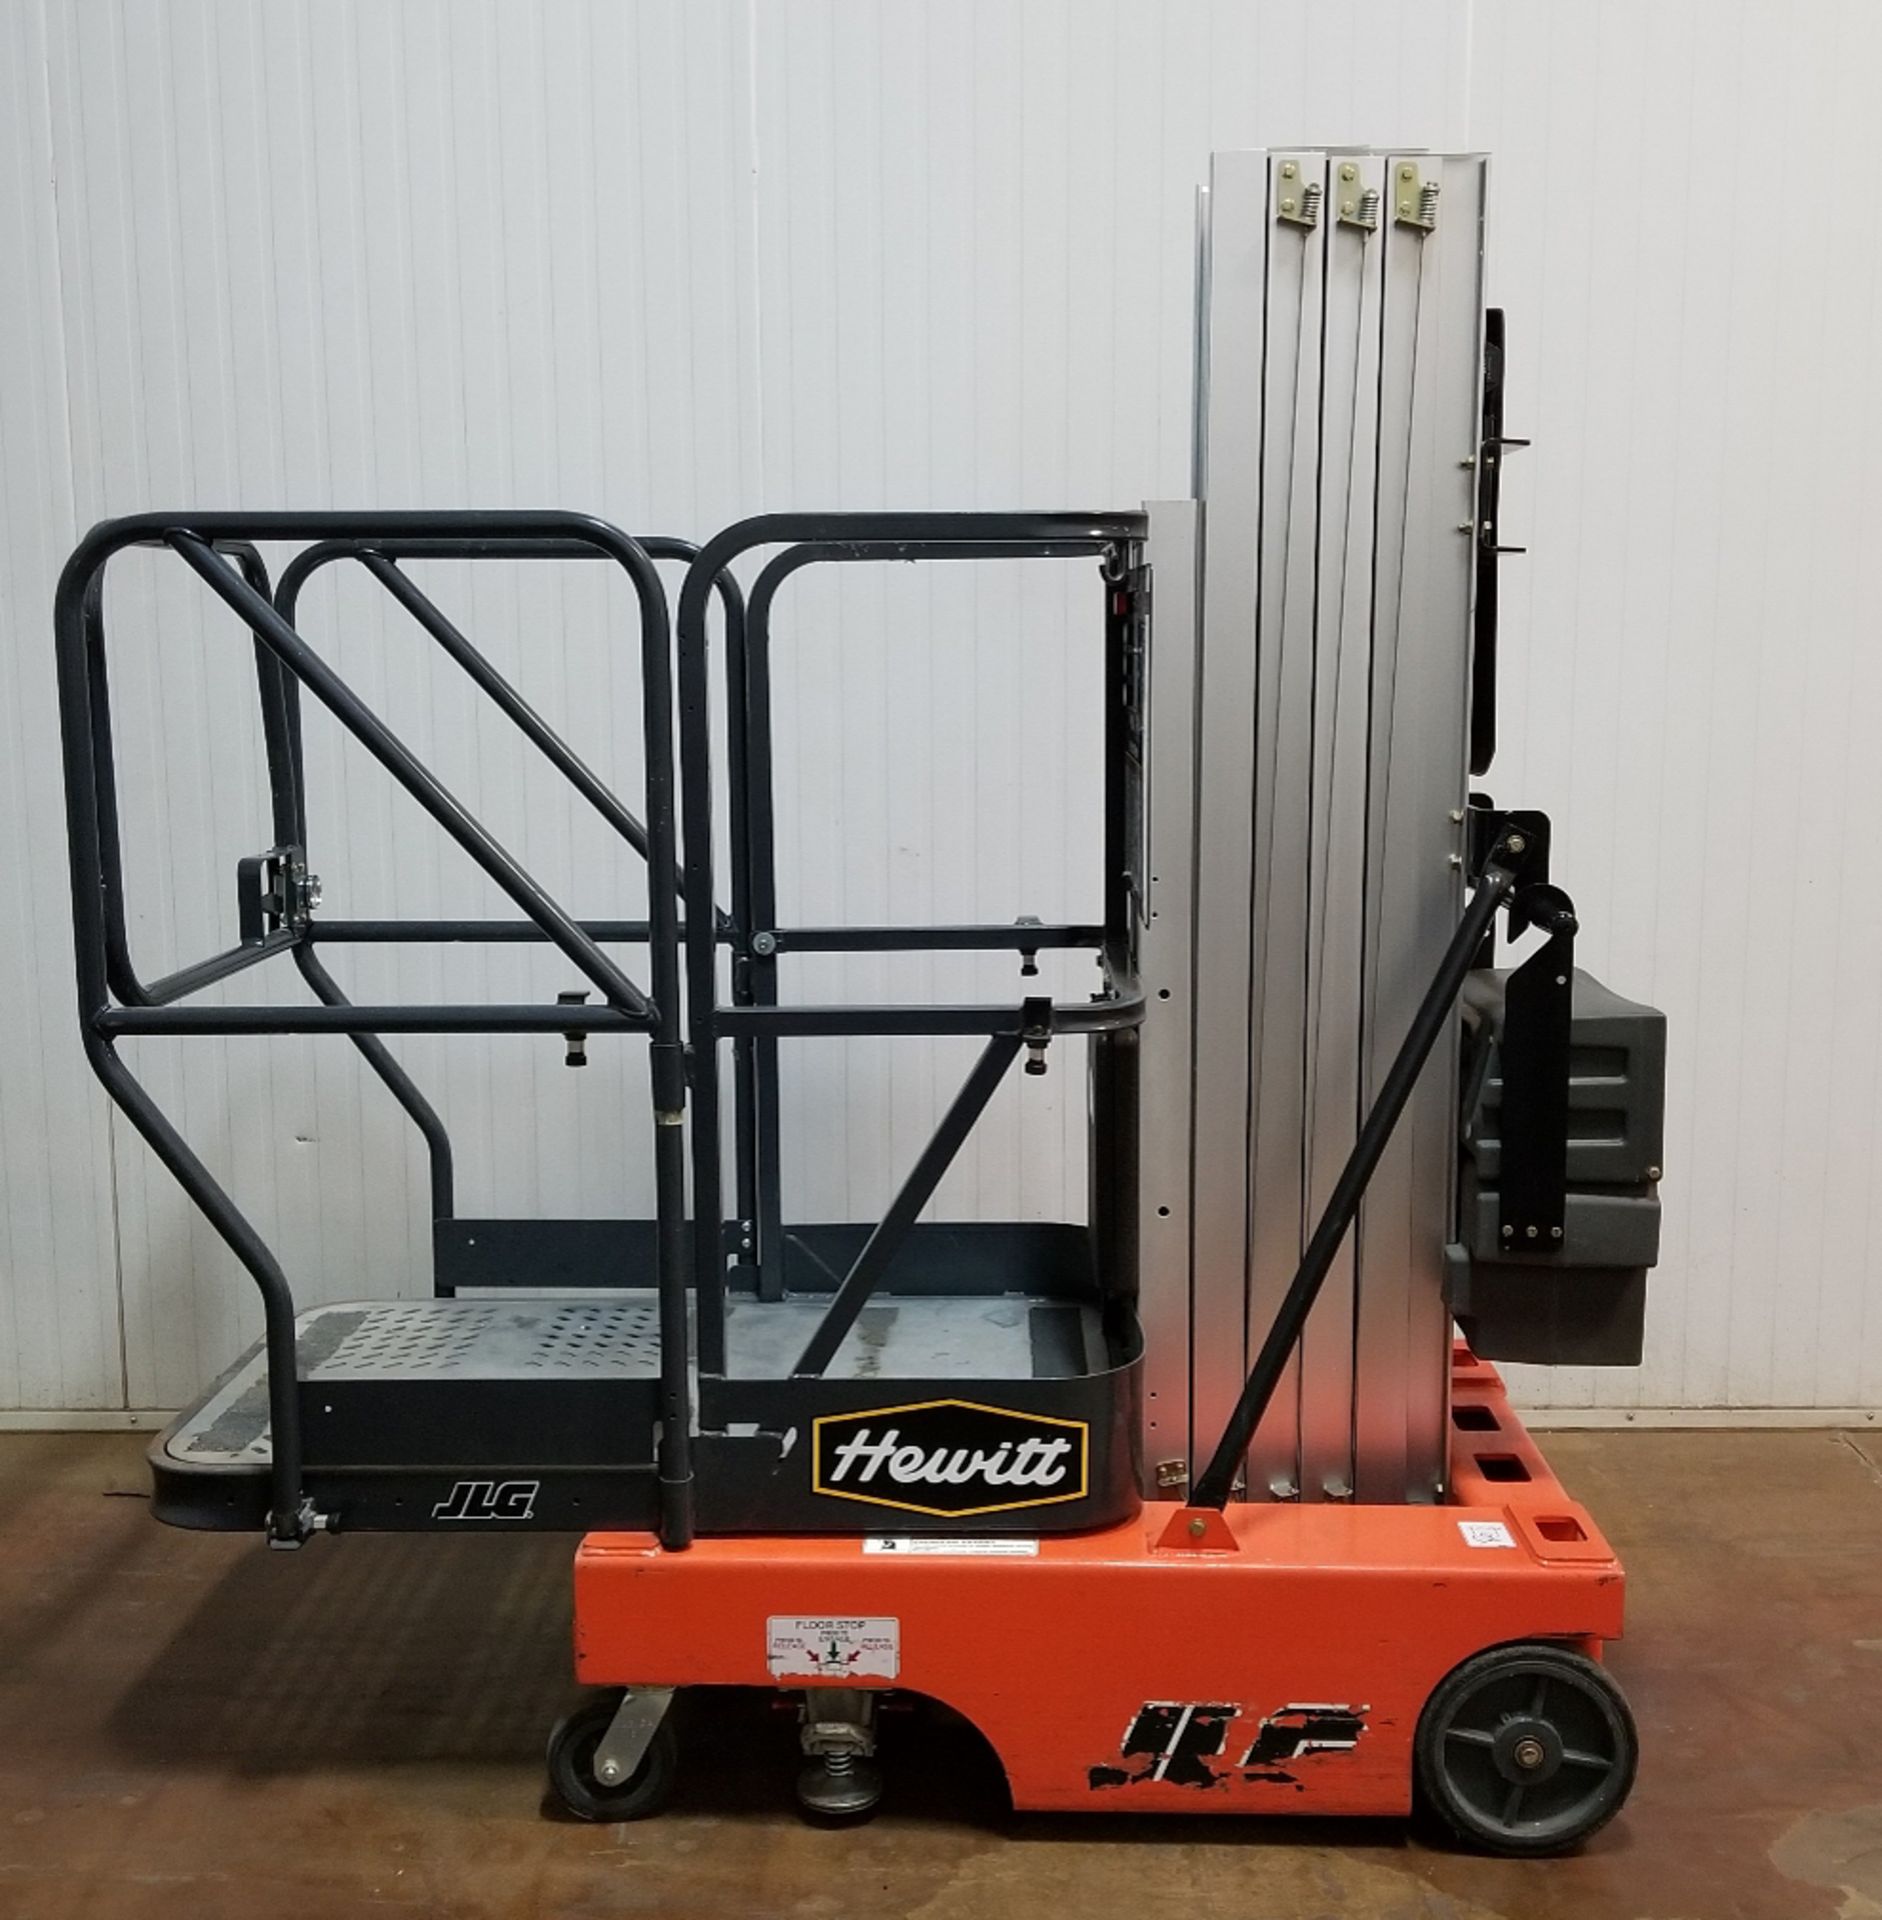 JLG (2016) 15SP 12V ELECTRIC ORDER PICKER WITH 400 LB. CAPACITY, 180" MAX. LIFT HEIGHT, BUILT-IN - Image 2 of 2